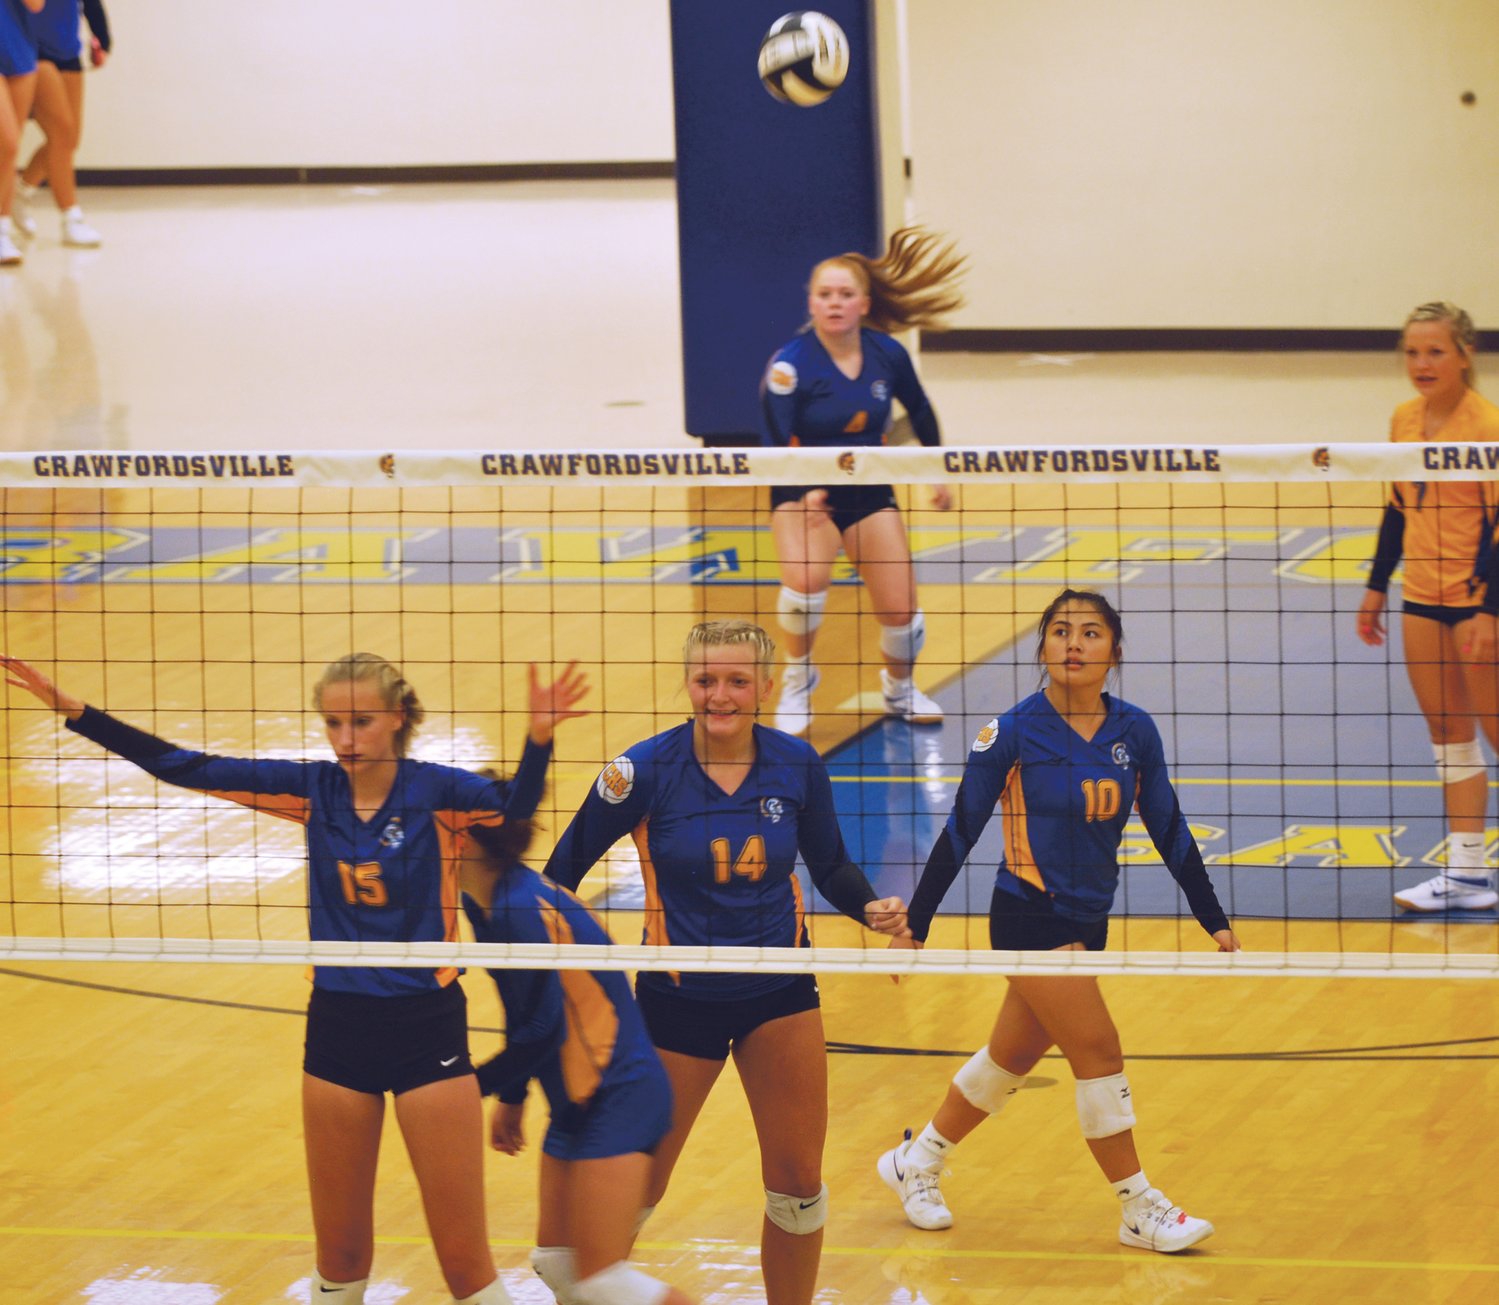 Crawfordsville's Laine Schlicher served 13 straight winners for the Athenians as they rattled off 13 straight points in the first game against Sheridan during a 3-0 win on Monday night.